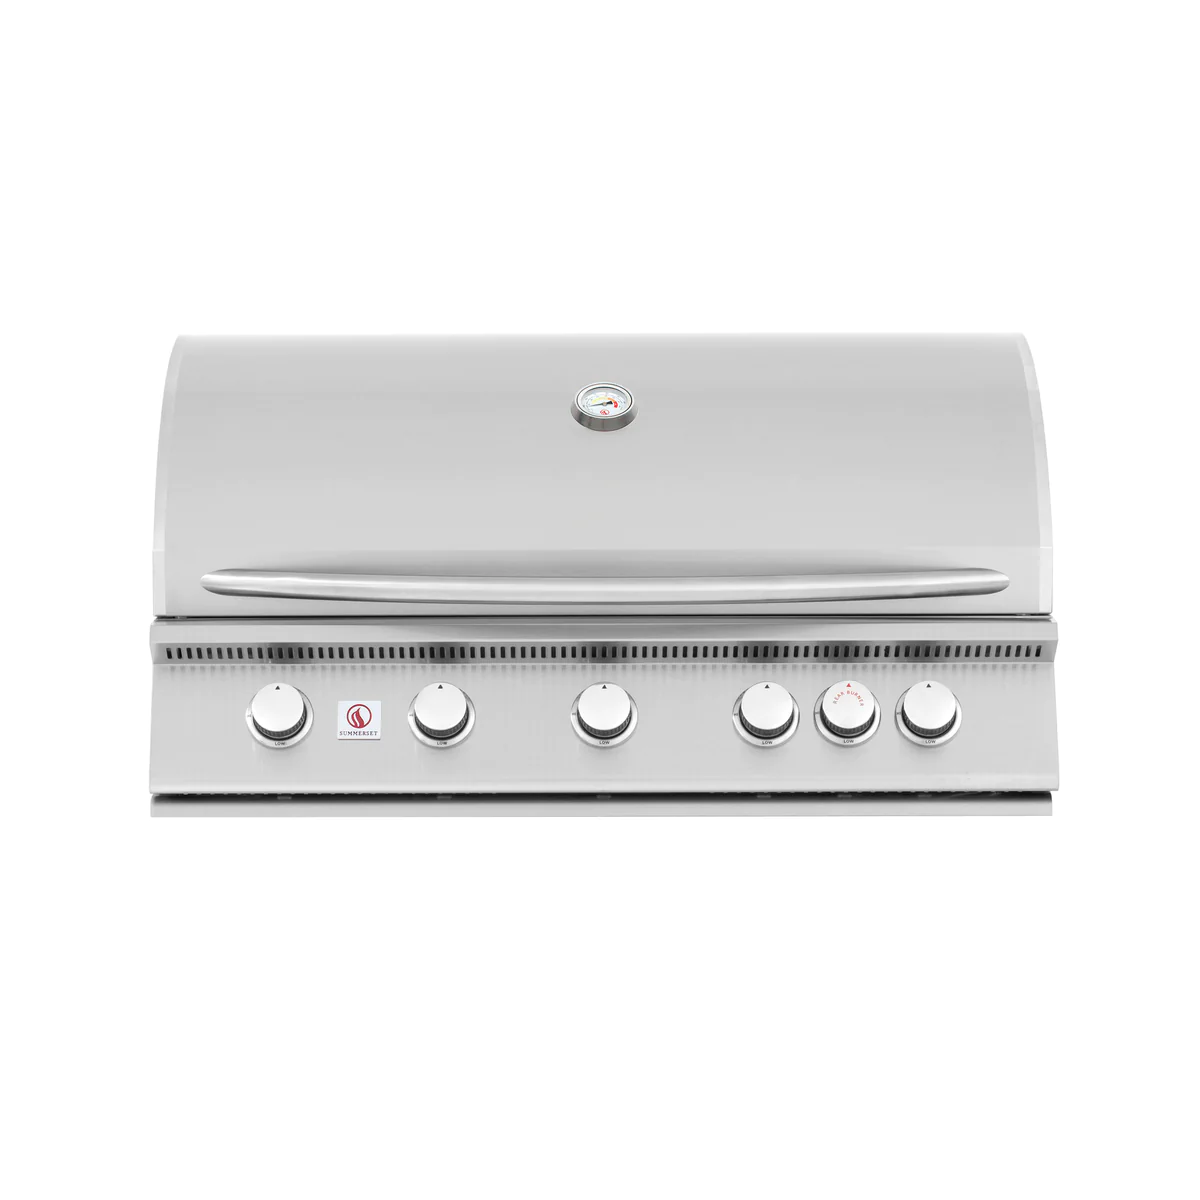 Summerset Sizzler Series 40 Inch Built-In Gas Grill - SIZ40-NG